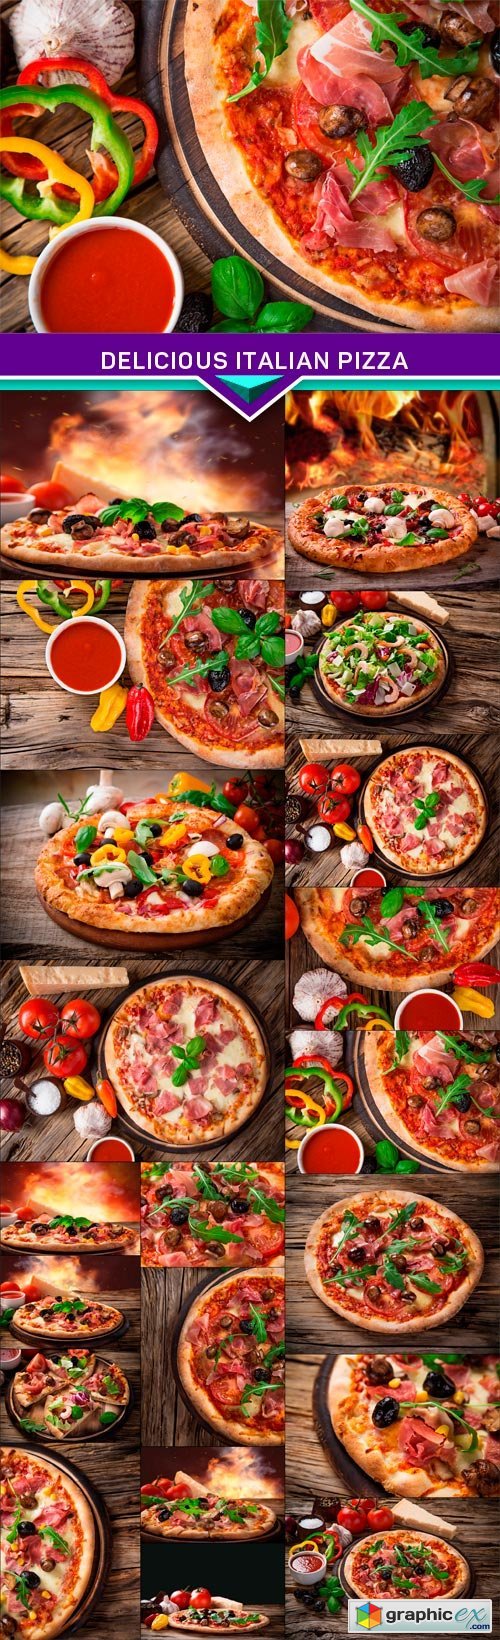 Delicious italian pizza served on wooden table 20x JPEG